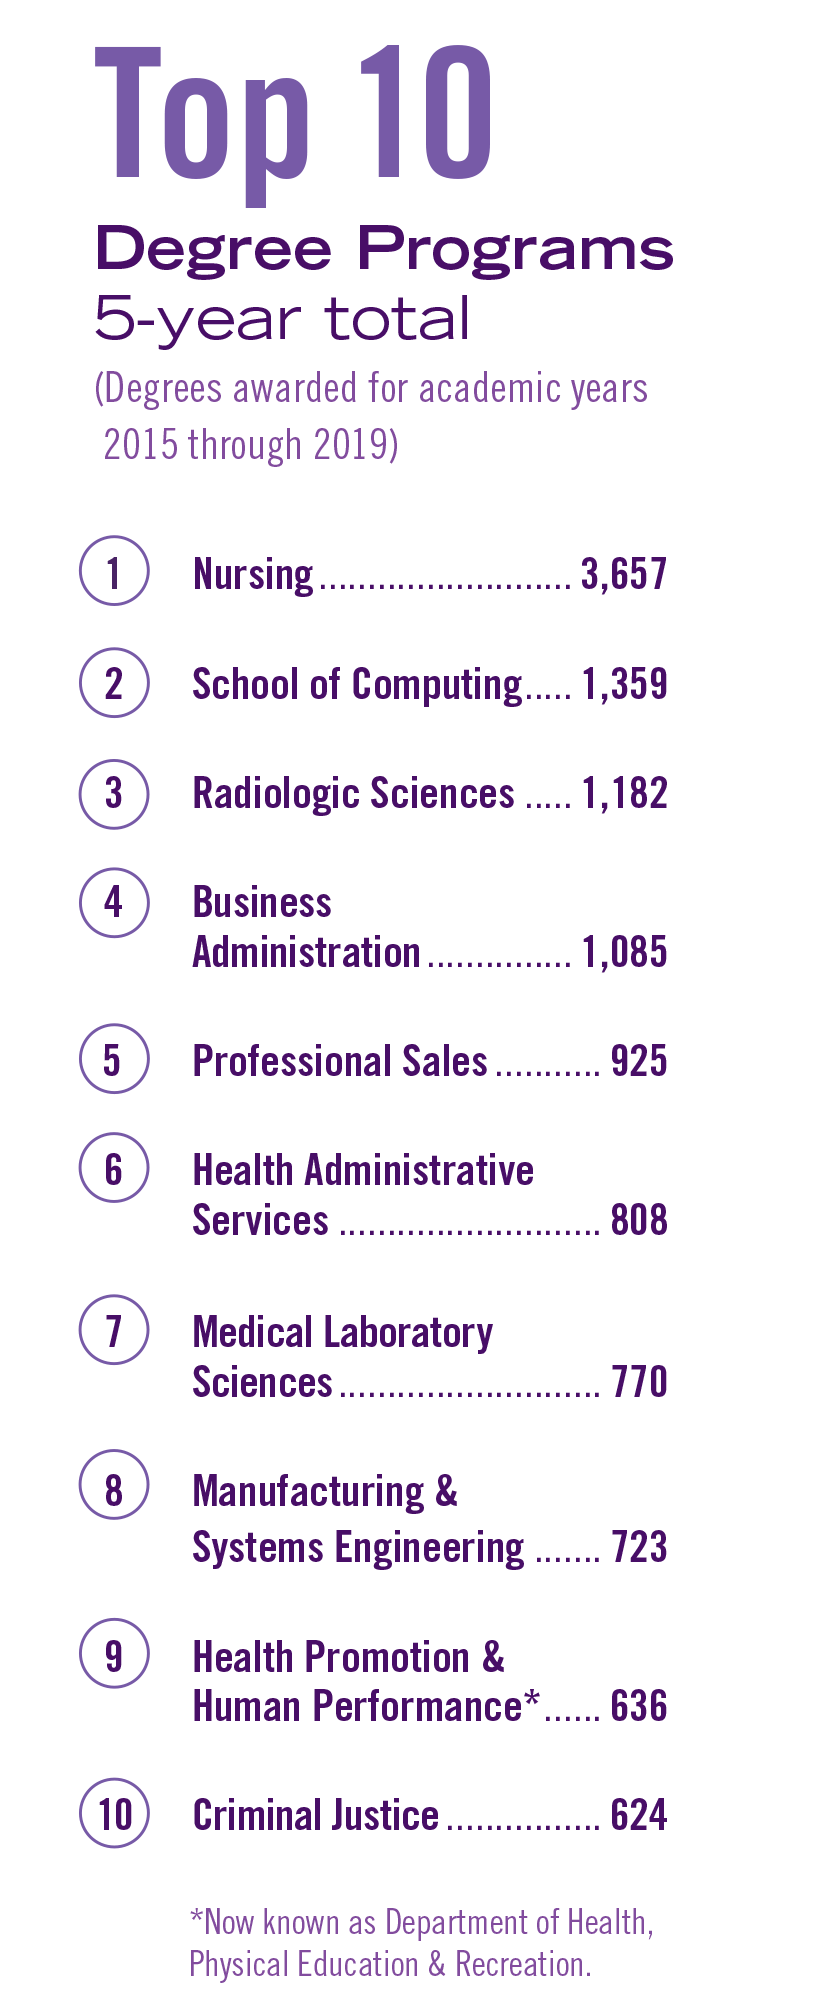 Weber State’s top 10 degree programs (degrees awarded for academic years 2015 through 2019) are: Nursing: 3,657, School of Computing: 1,359, Radiologic Sciences: 1,182, Business Administration: 1,085, Professional Sales: 925, Health Administrative Services: 808, Medical Laboratory Sciences: 770, Manufacturing & Systems Engineering: 723, Health Promotion & Human Performance: 636, Criminal Justice: 624